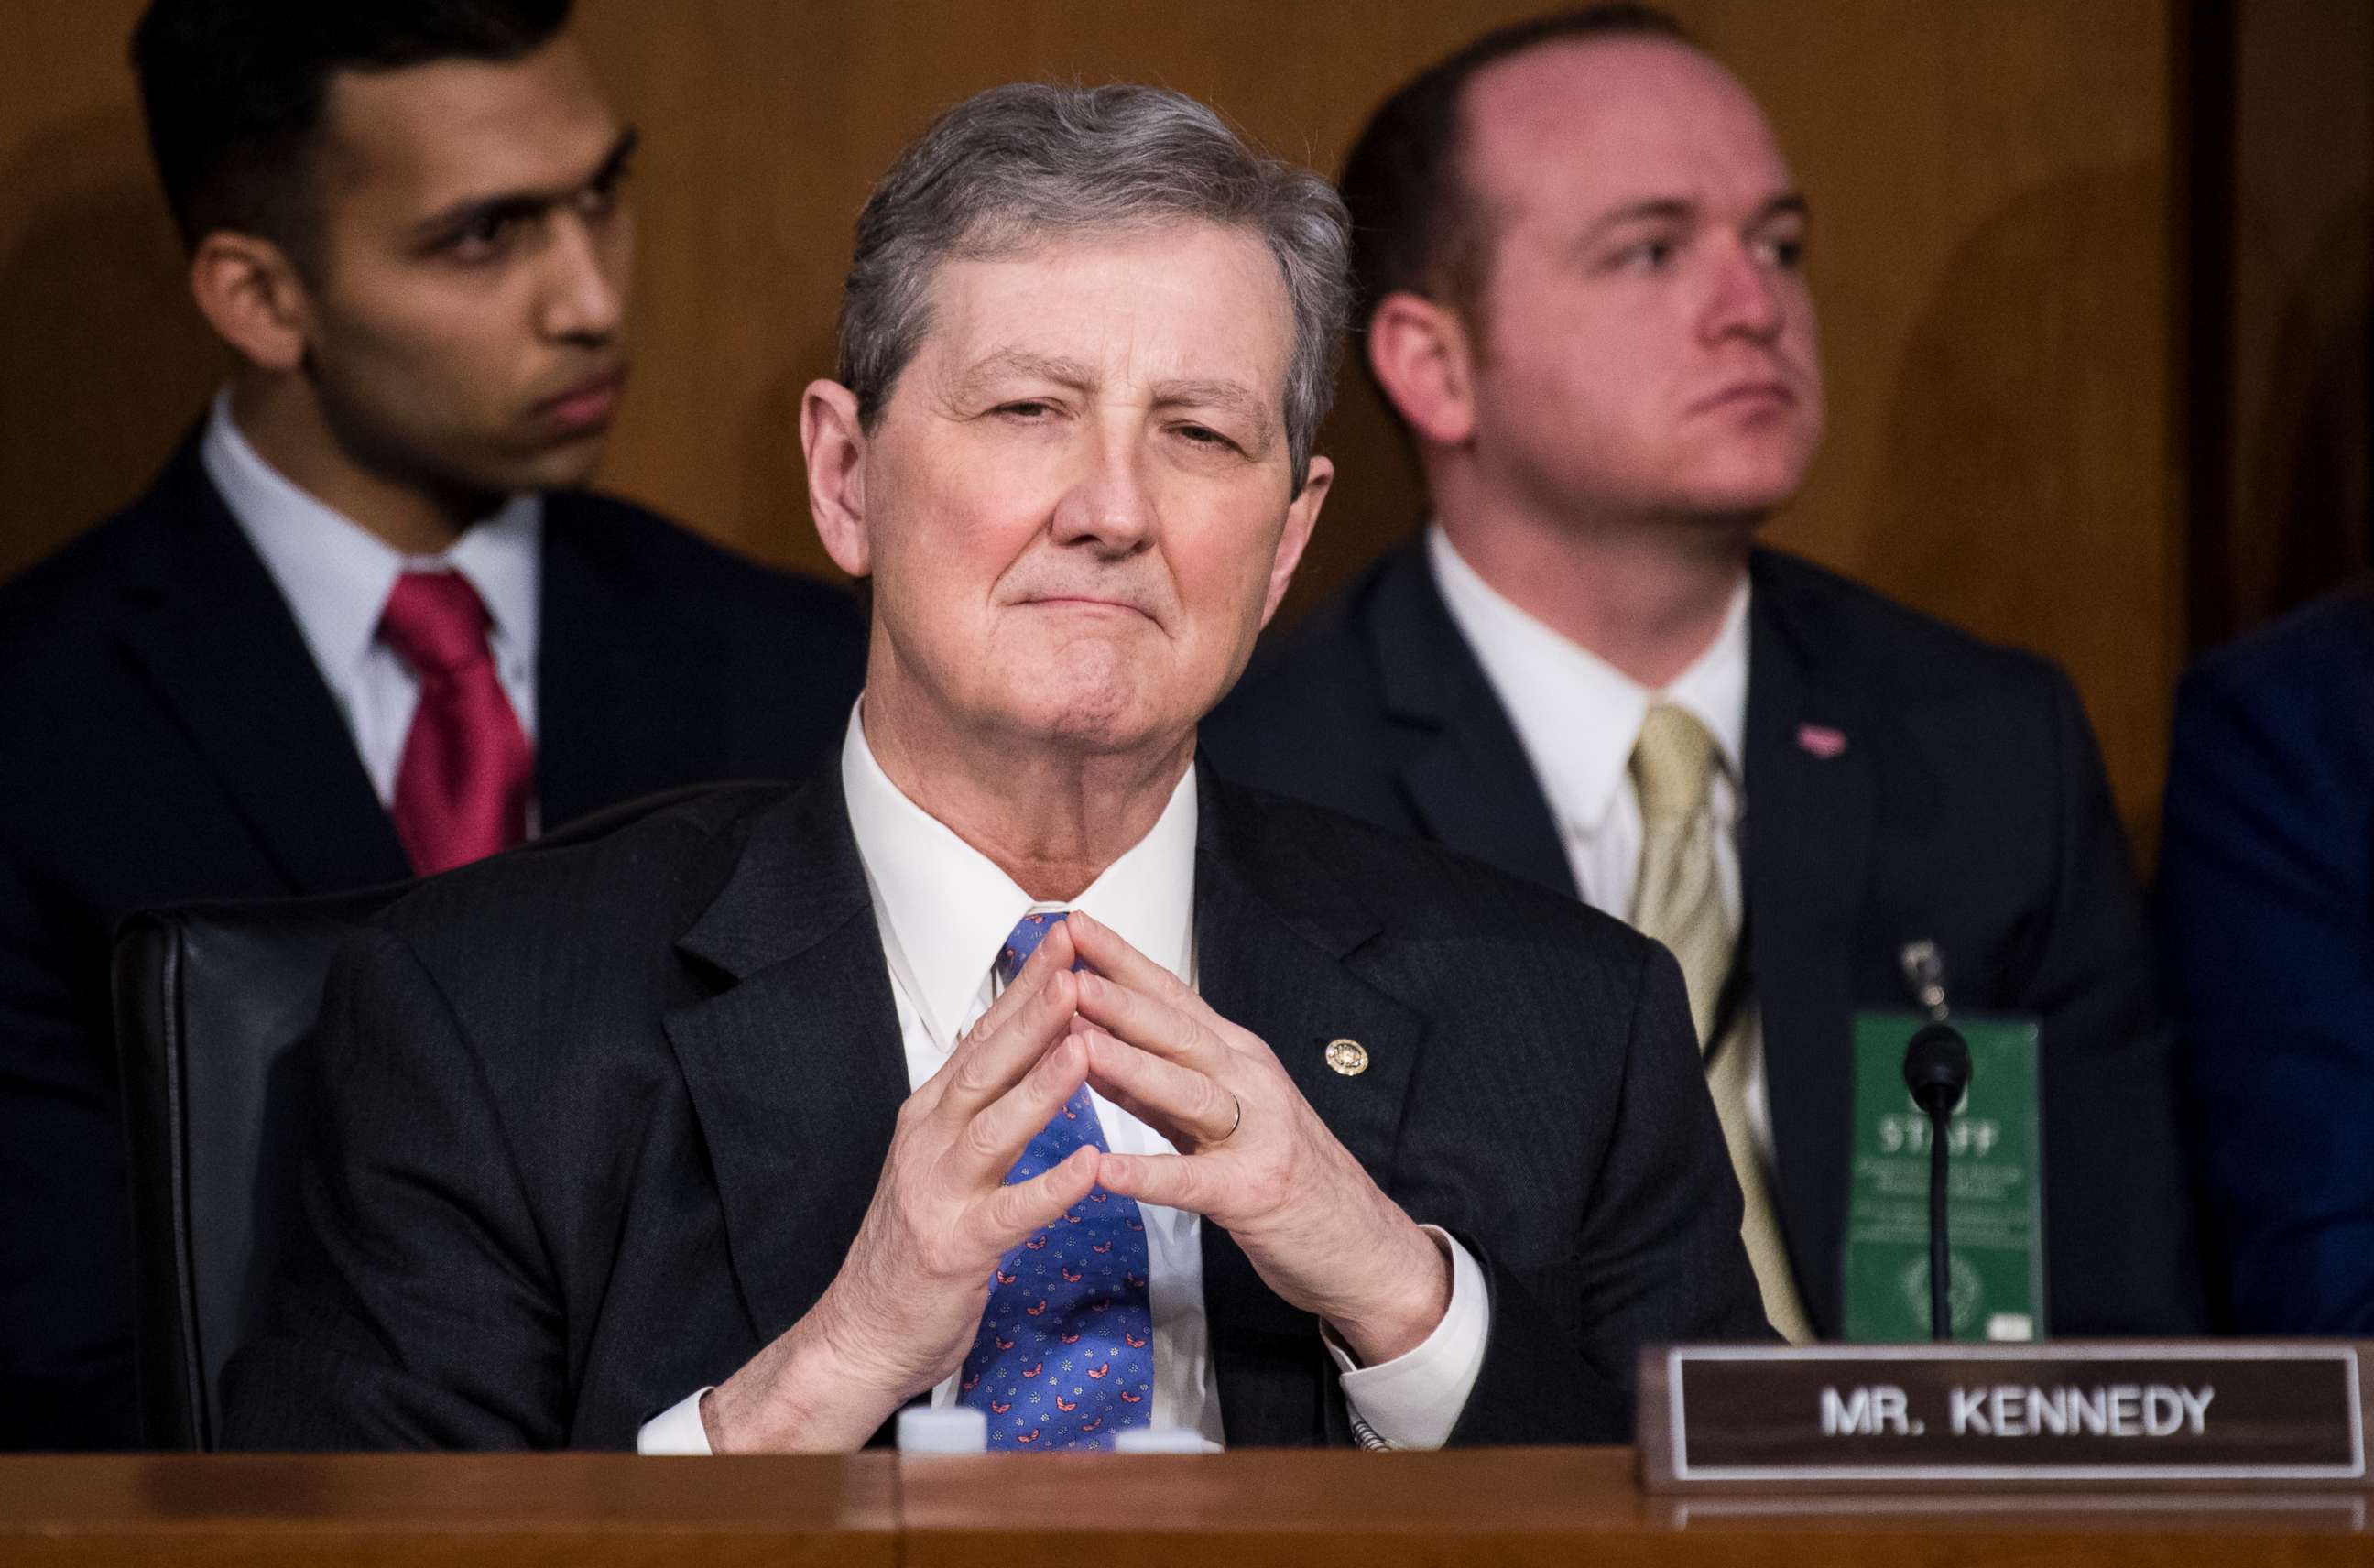 PHOTO: Sen. John Kennedy listens during the first day of the Senate Judiciary Committee confirmation hearings for Neil Gorsuch to be associate justice of the Supreme Court, March 20, 2017.